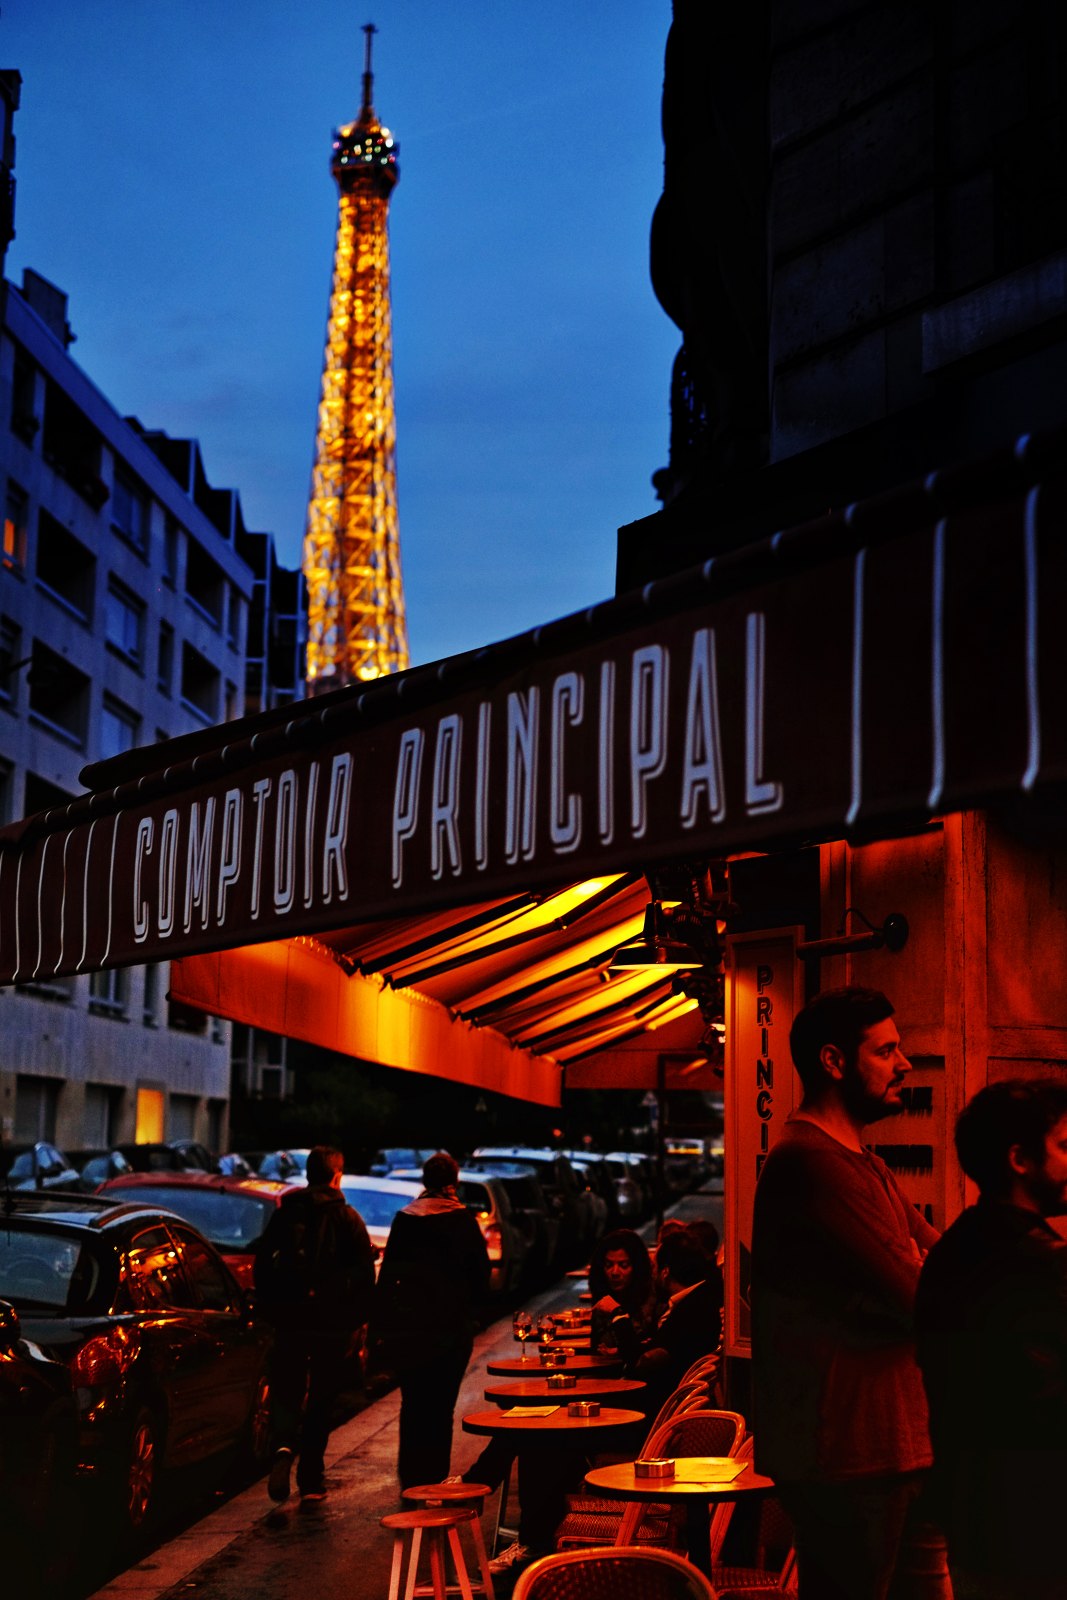 A street view of the Eiffel Tower and classic french bistro at night. Lifestyle photography by Kent Johnson.